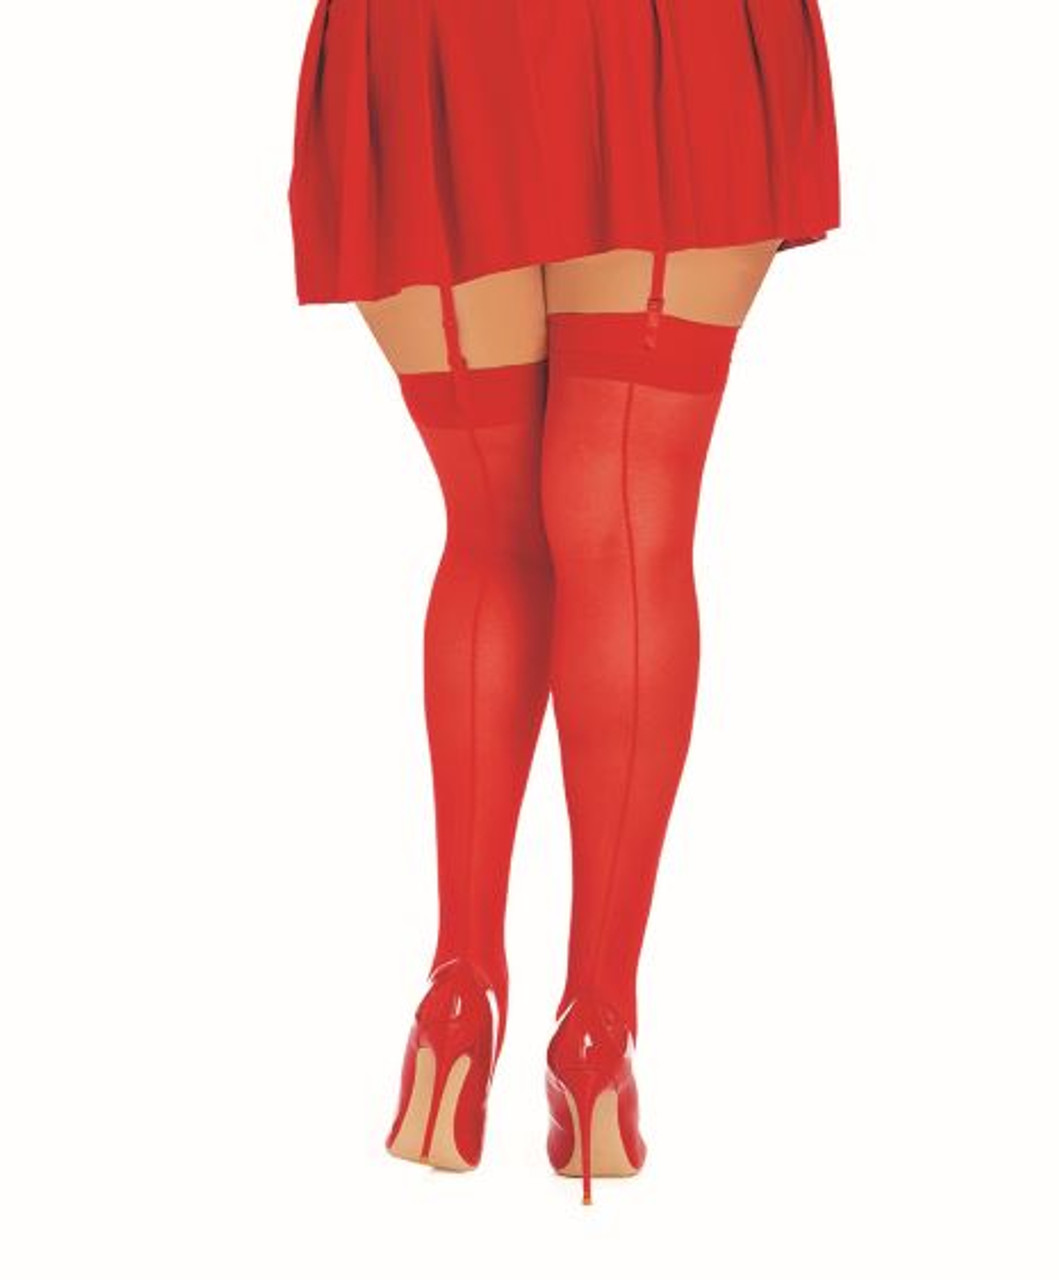 Dreamgirl Sheer Thigh Highs with Back Seam